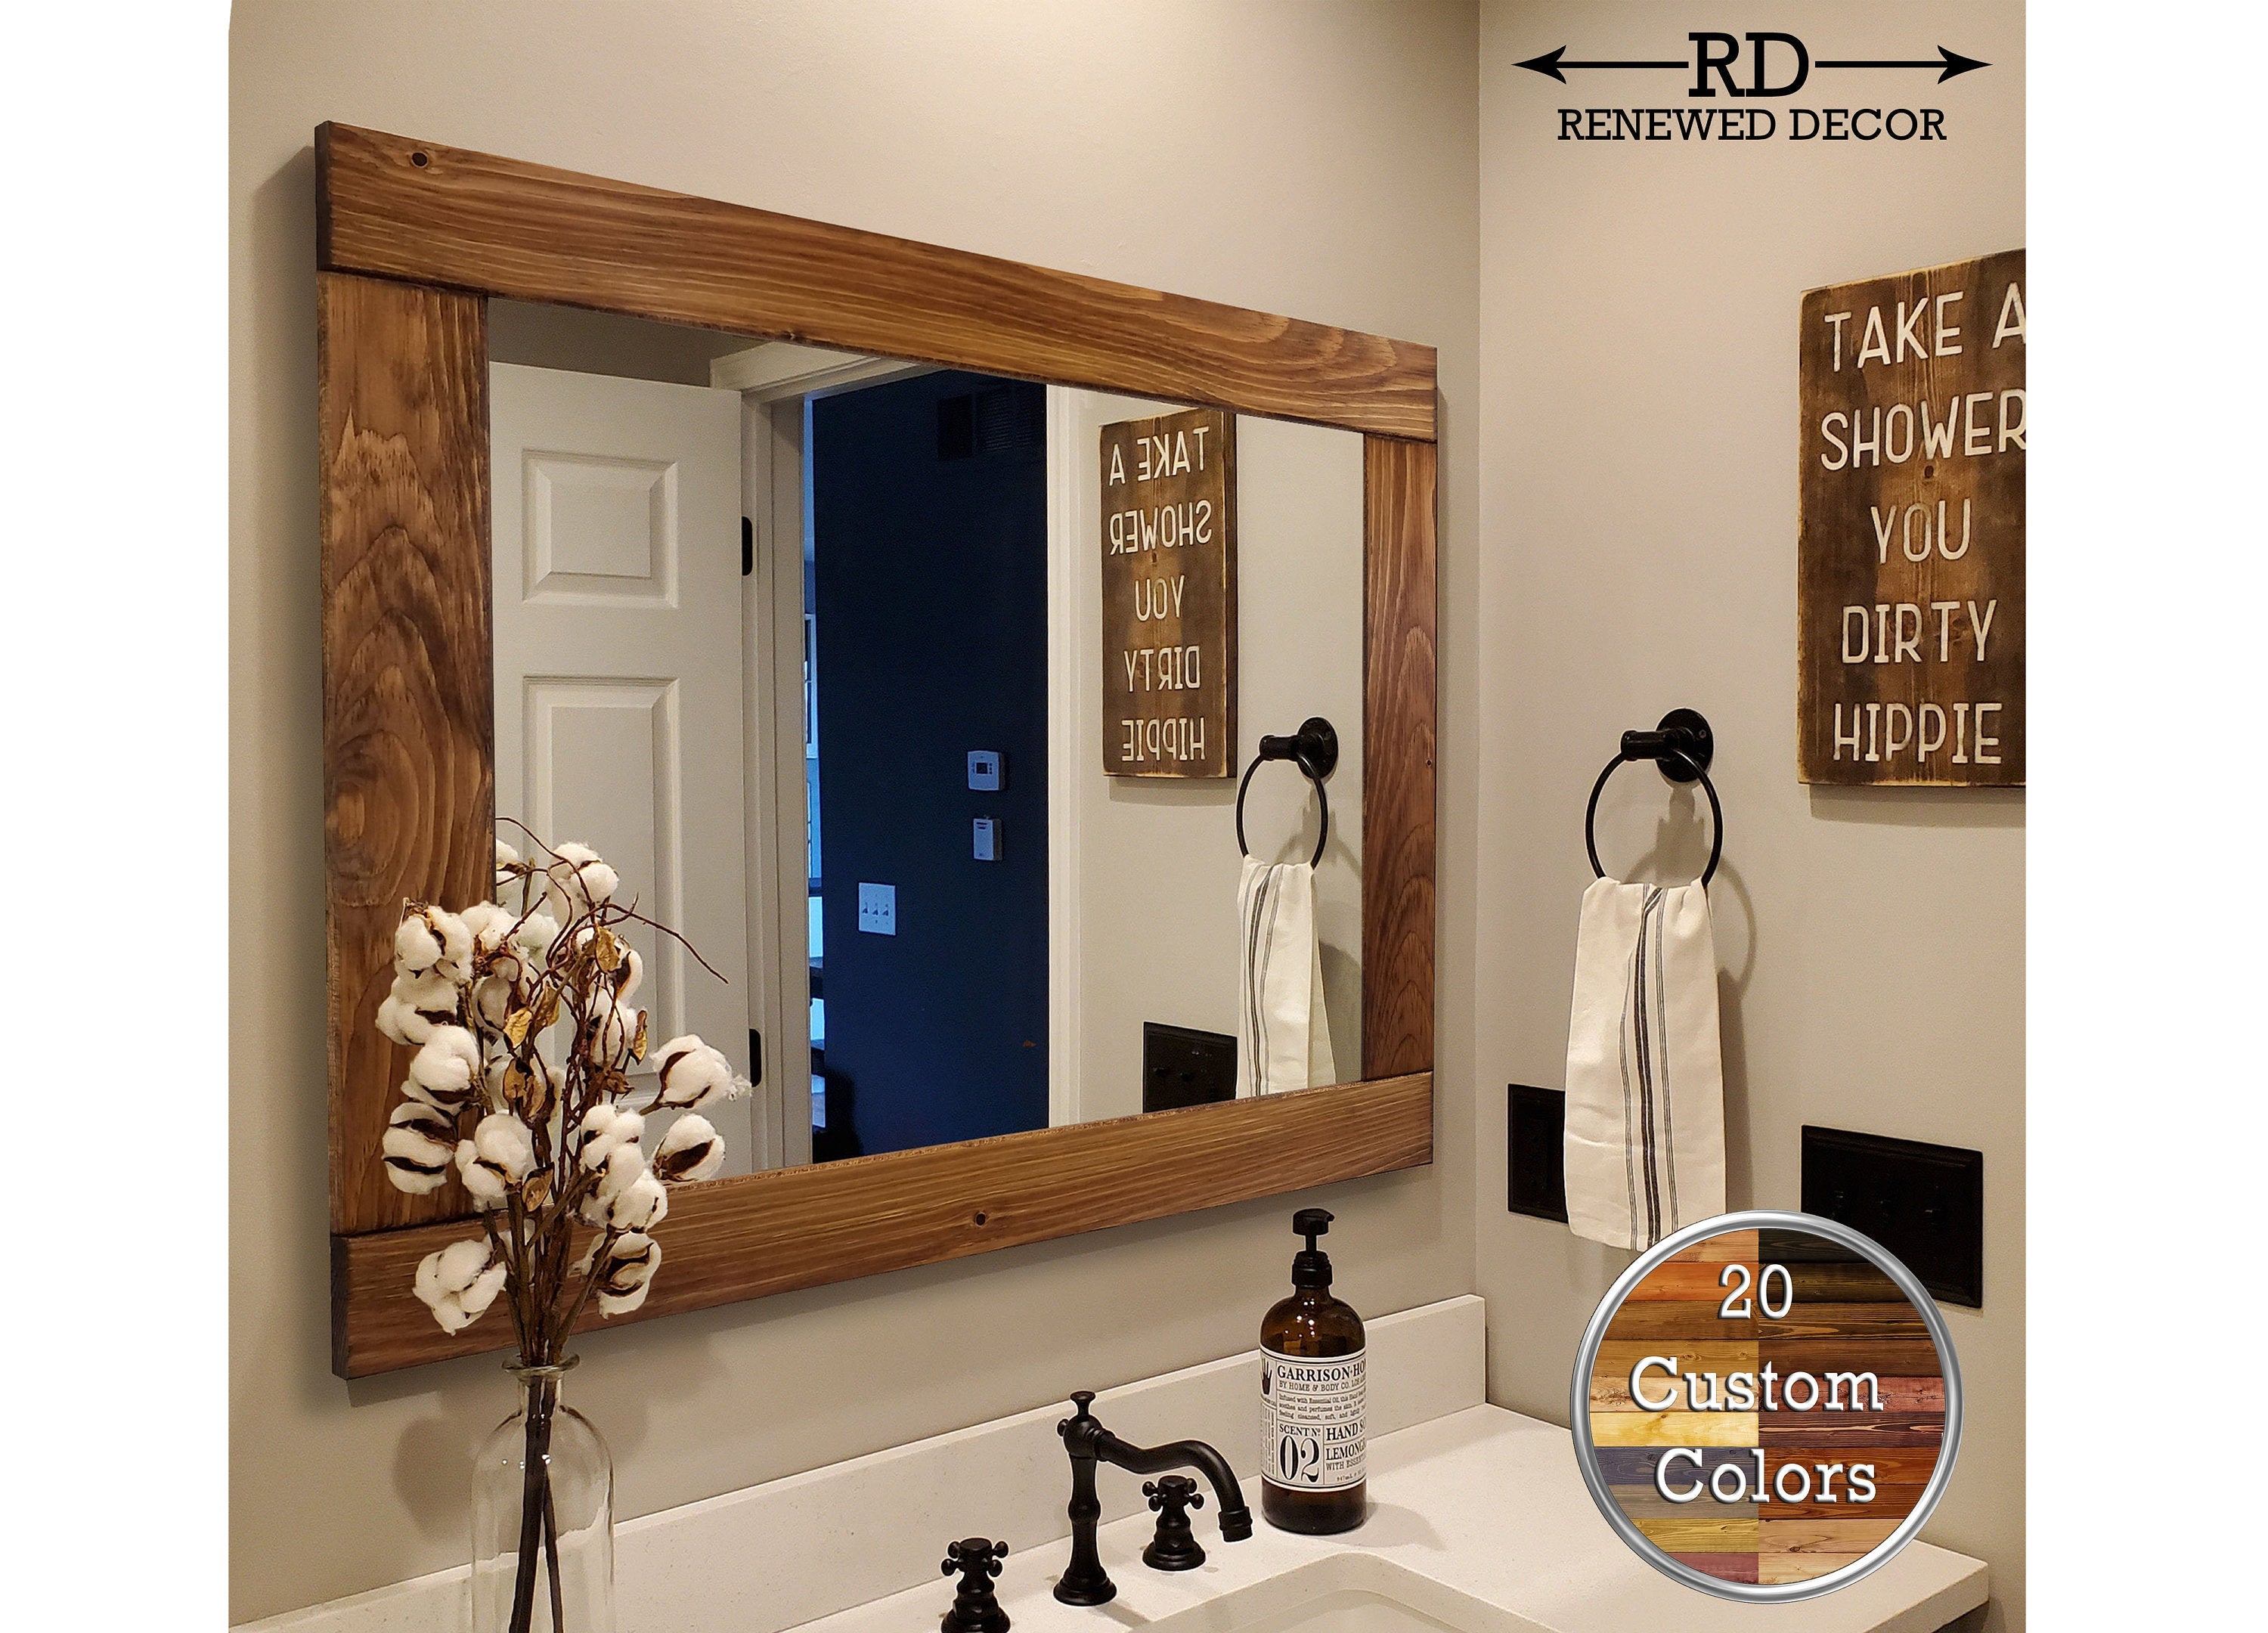 Natural Rustic Wood Framed Wall Mirror, Handmade in the USA